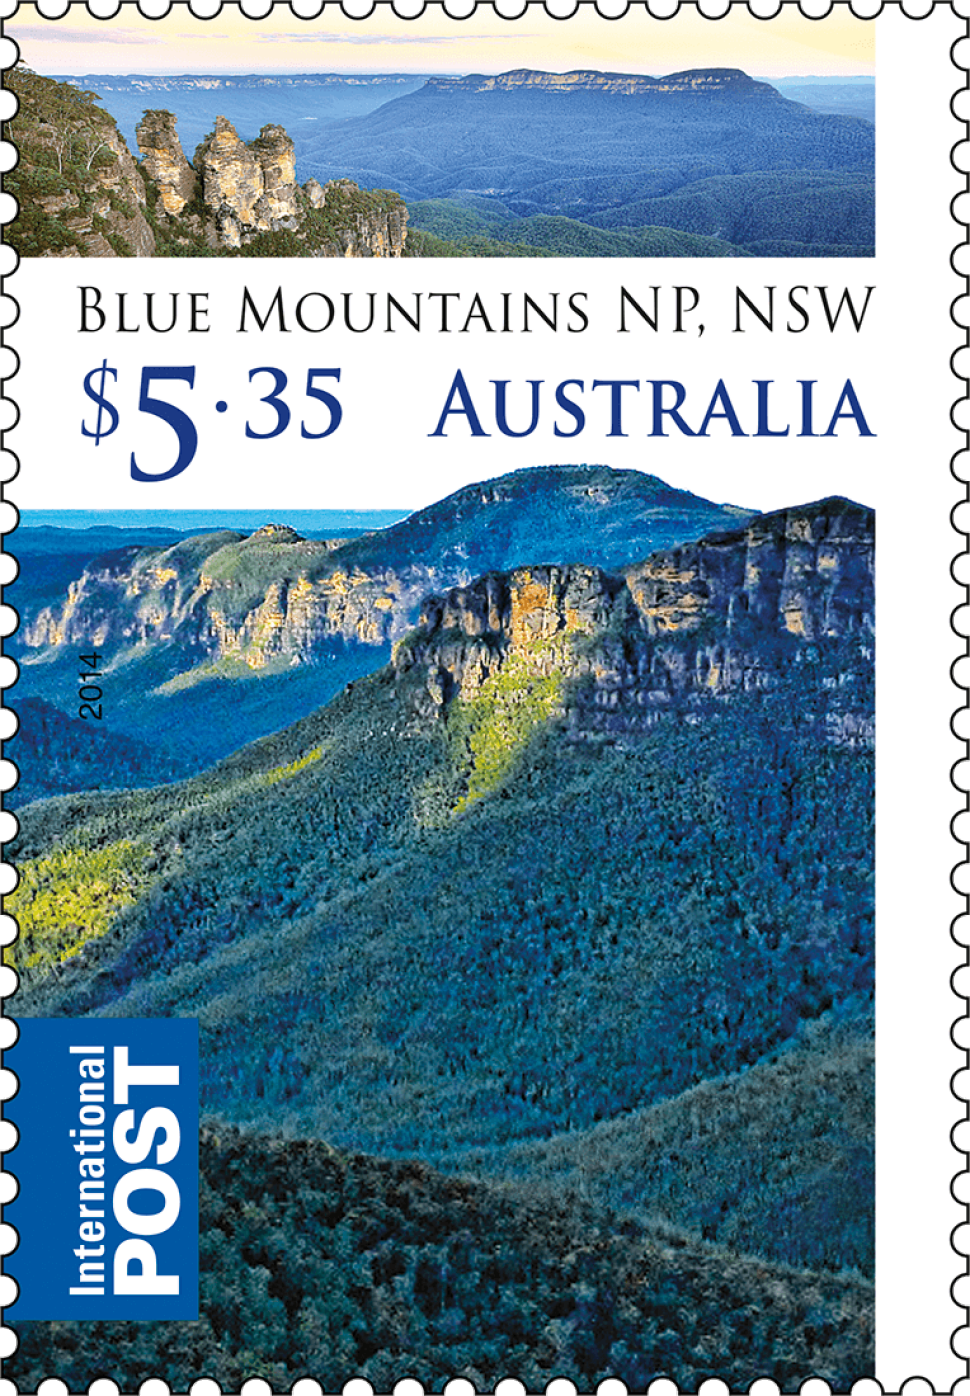 $5.35 Blue Mountains National Park, NSW